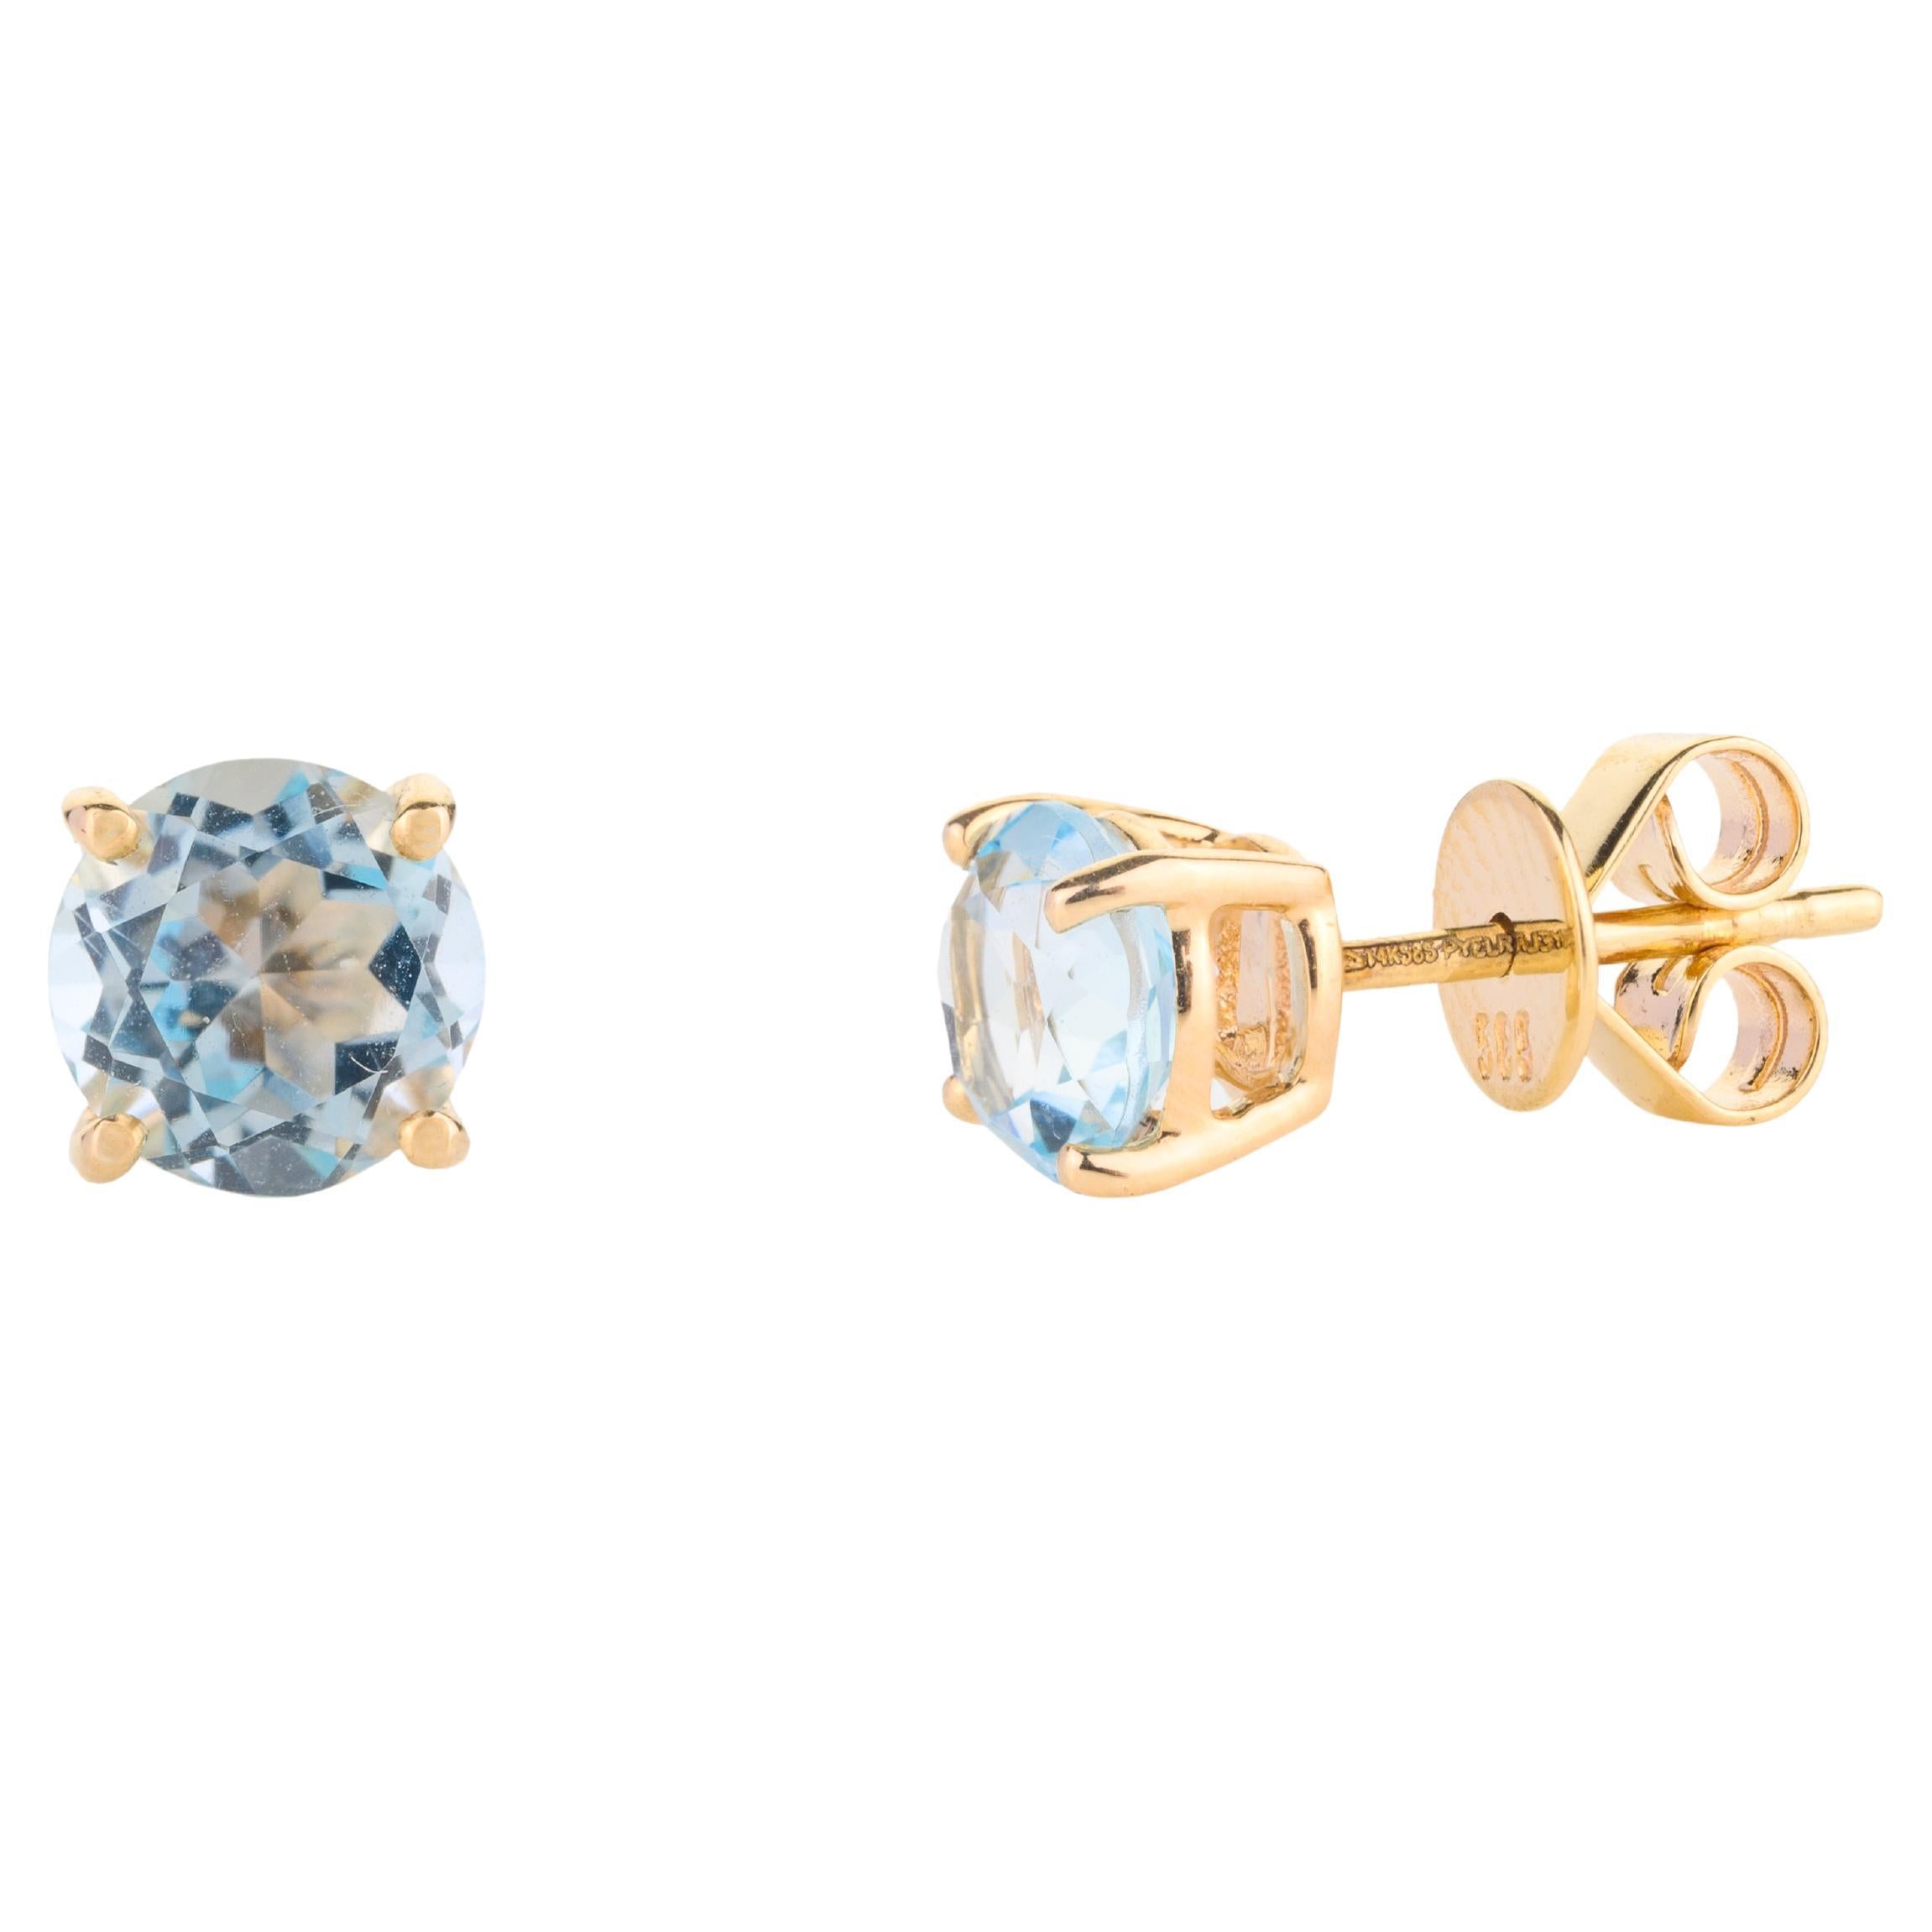 2.13 Carats Blue Topaz Pushback Stud Earrings for Her in 14k Solid Yellow Gold